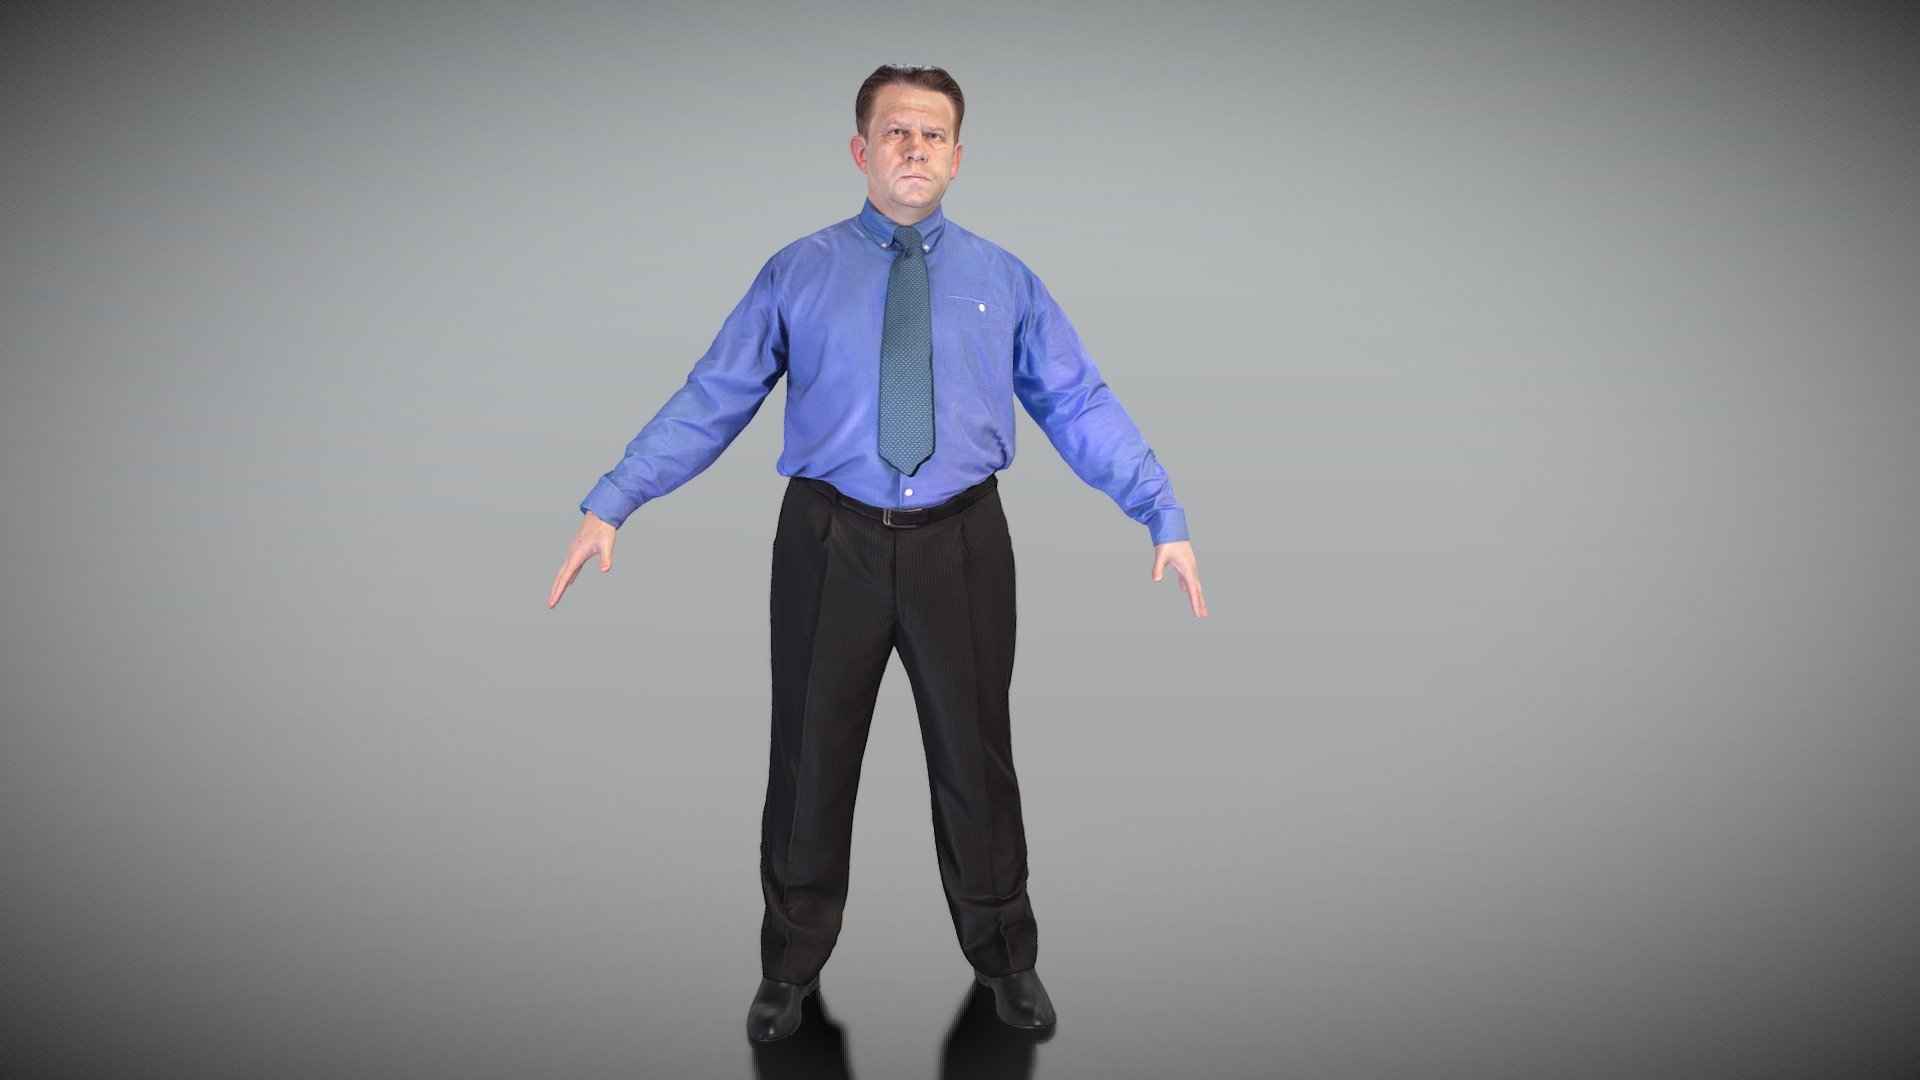 This is a true human size and detailed model of a confident handsome man of Caucasian appearance dressed in business style. The model is captured in the A-pose with mesh ready for rigging and animation in all most usable 3d software.

Technical specifications:


digital double scan model
low-poly model
high-poly model (.ztl tool with 5-6 subdivisions) clean and retopologized automatically via ZRemesher
fully quad topology
sufficiently clean
edge Loops based
ready for subdivision
8K texture color map
non-overlapping UV map
ready for animation
PBR textures 8K resolution: Normal, Displacement, Albedo maps

Download package includes a Cinema 4D project file with Redshift shader, OBJ, FBX, STL files, which are applicable for 3ds Max, Maya, Unreal Engine, Unity, Blender, etc. All the textures you will find in the “Tex” folder, included into the main archive.

3D EVERYTHING

Stand with Ukraine! - Businessman in blue shirt and tie in A-pose 387 - Buy Royalty Free 3D model by deep3dstudio 3d model